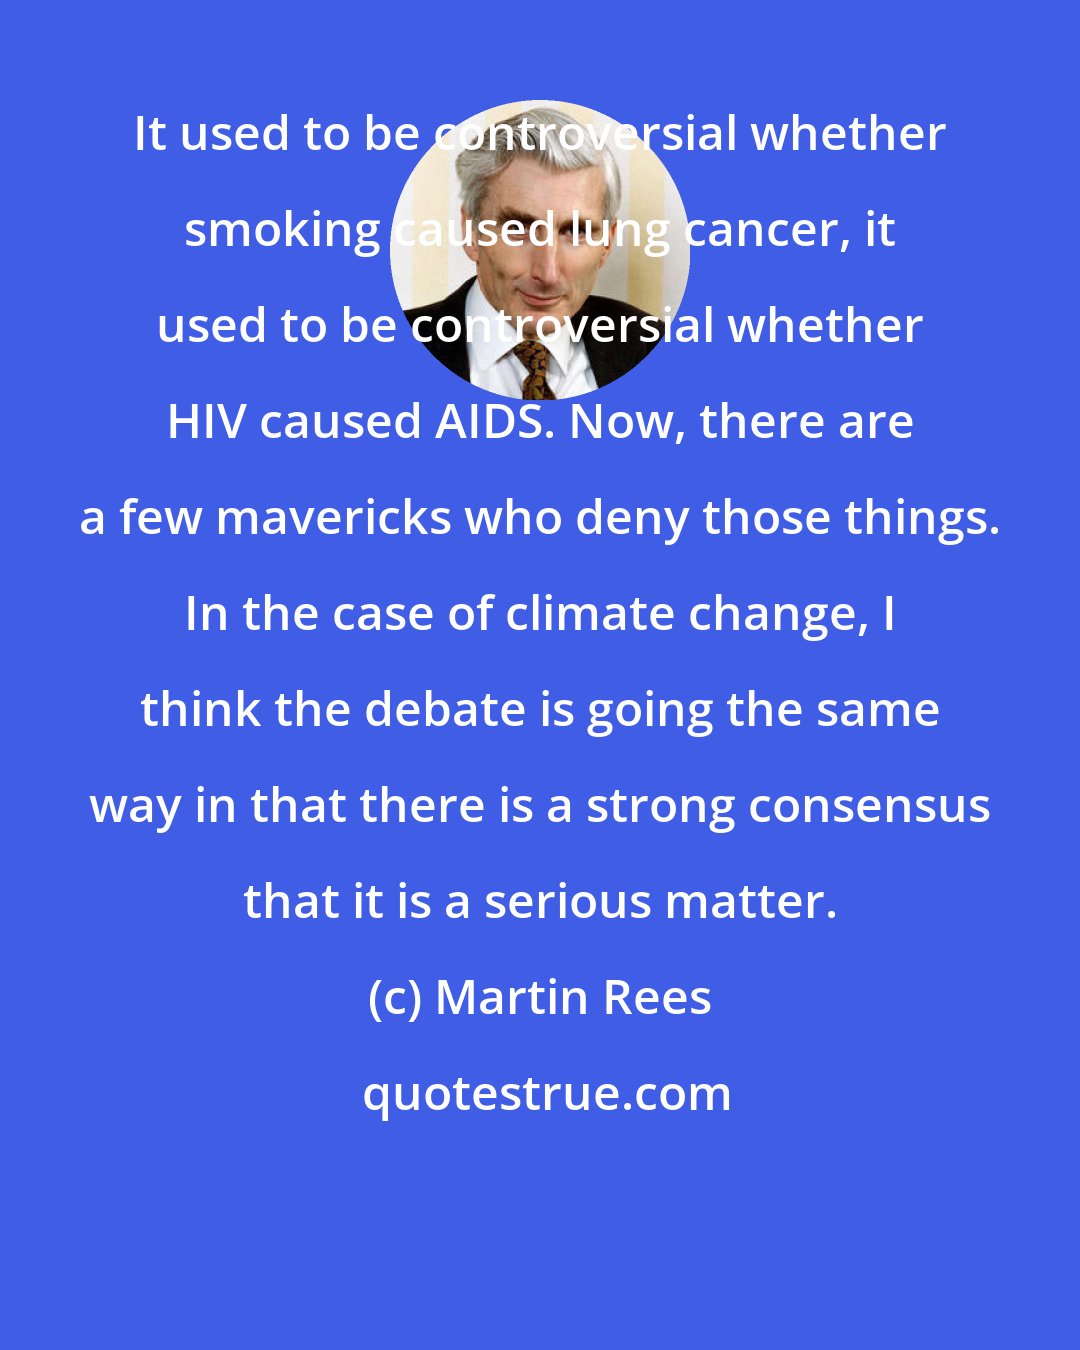 Martin Rees: It used to be controversial whether smoking caused lung cancer, it used to be controversial whether HIV caused AIDS. Now, there are a few mavericks who deny those things. In the case of climate change, I think the debate is going the same way in that there is a strong consensus that it is a serious matter.